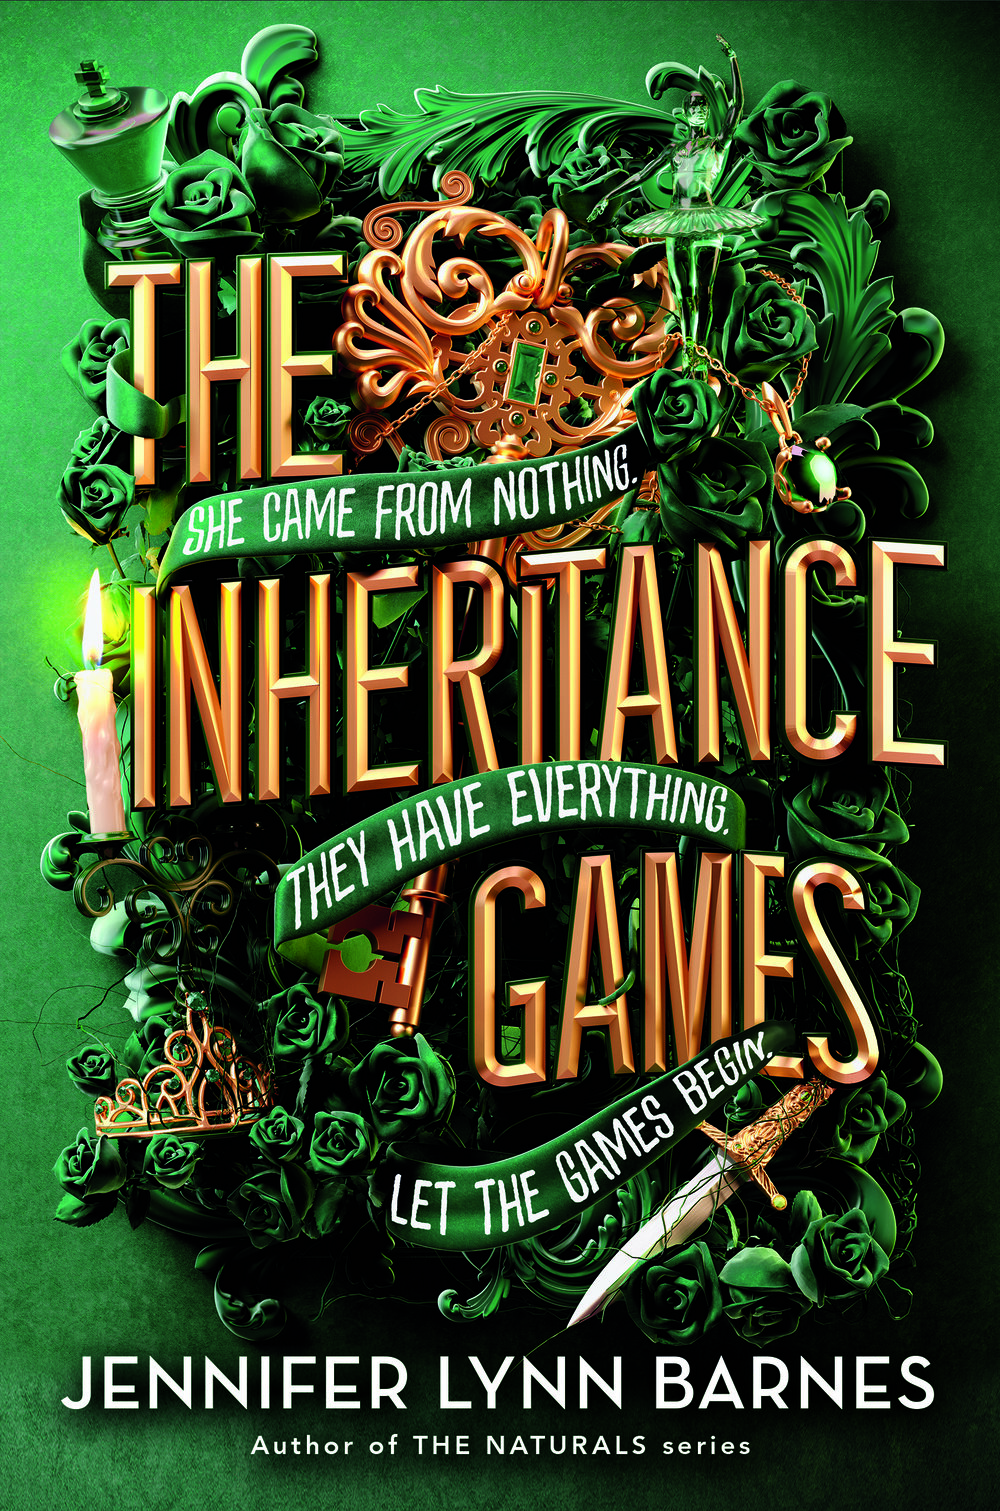 REVIEW: 'The Inheritance Games' series captures audience with fast